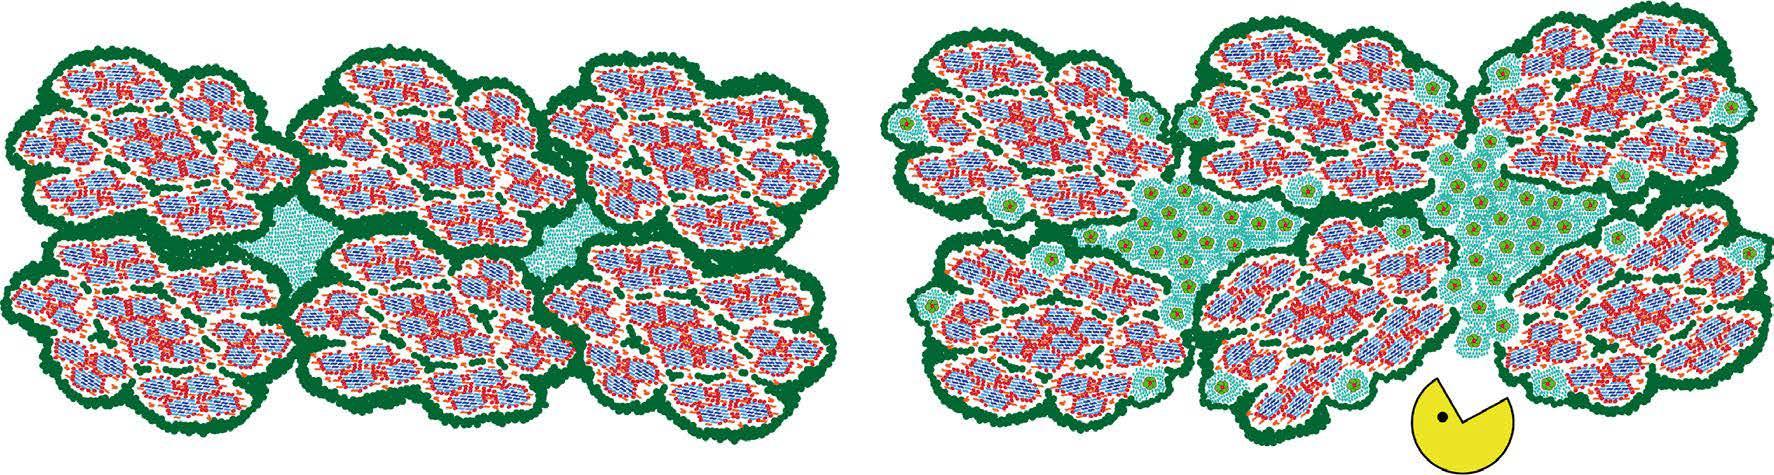 Model of poplar macrofibril assembly without (left) and with callose deposition (right). Callose self-aggregates in between macrofibrils, which explains the observed increase in secondary cell wall porosity. The range of pore size affected is 4–30 nm, which is in the size range of hydrolytic enzymes. As such, callose is believed to act as a hydrophilic spacer of secondary cell wall polymer, further promoting access to hydrolytic enzymes for subsequent saccharification